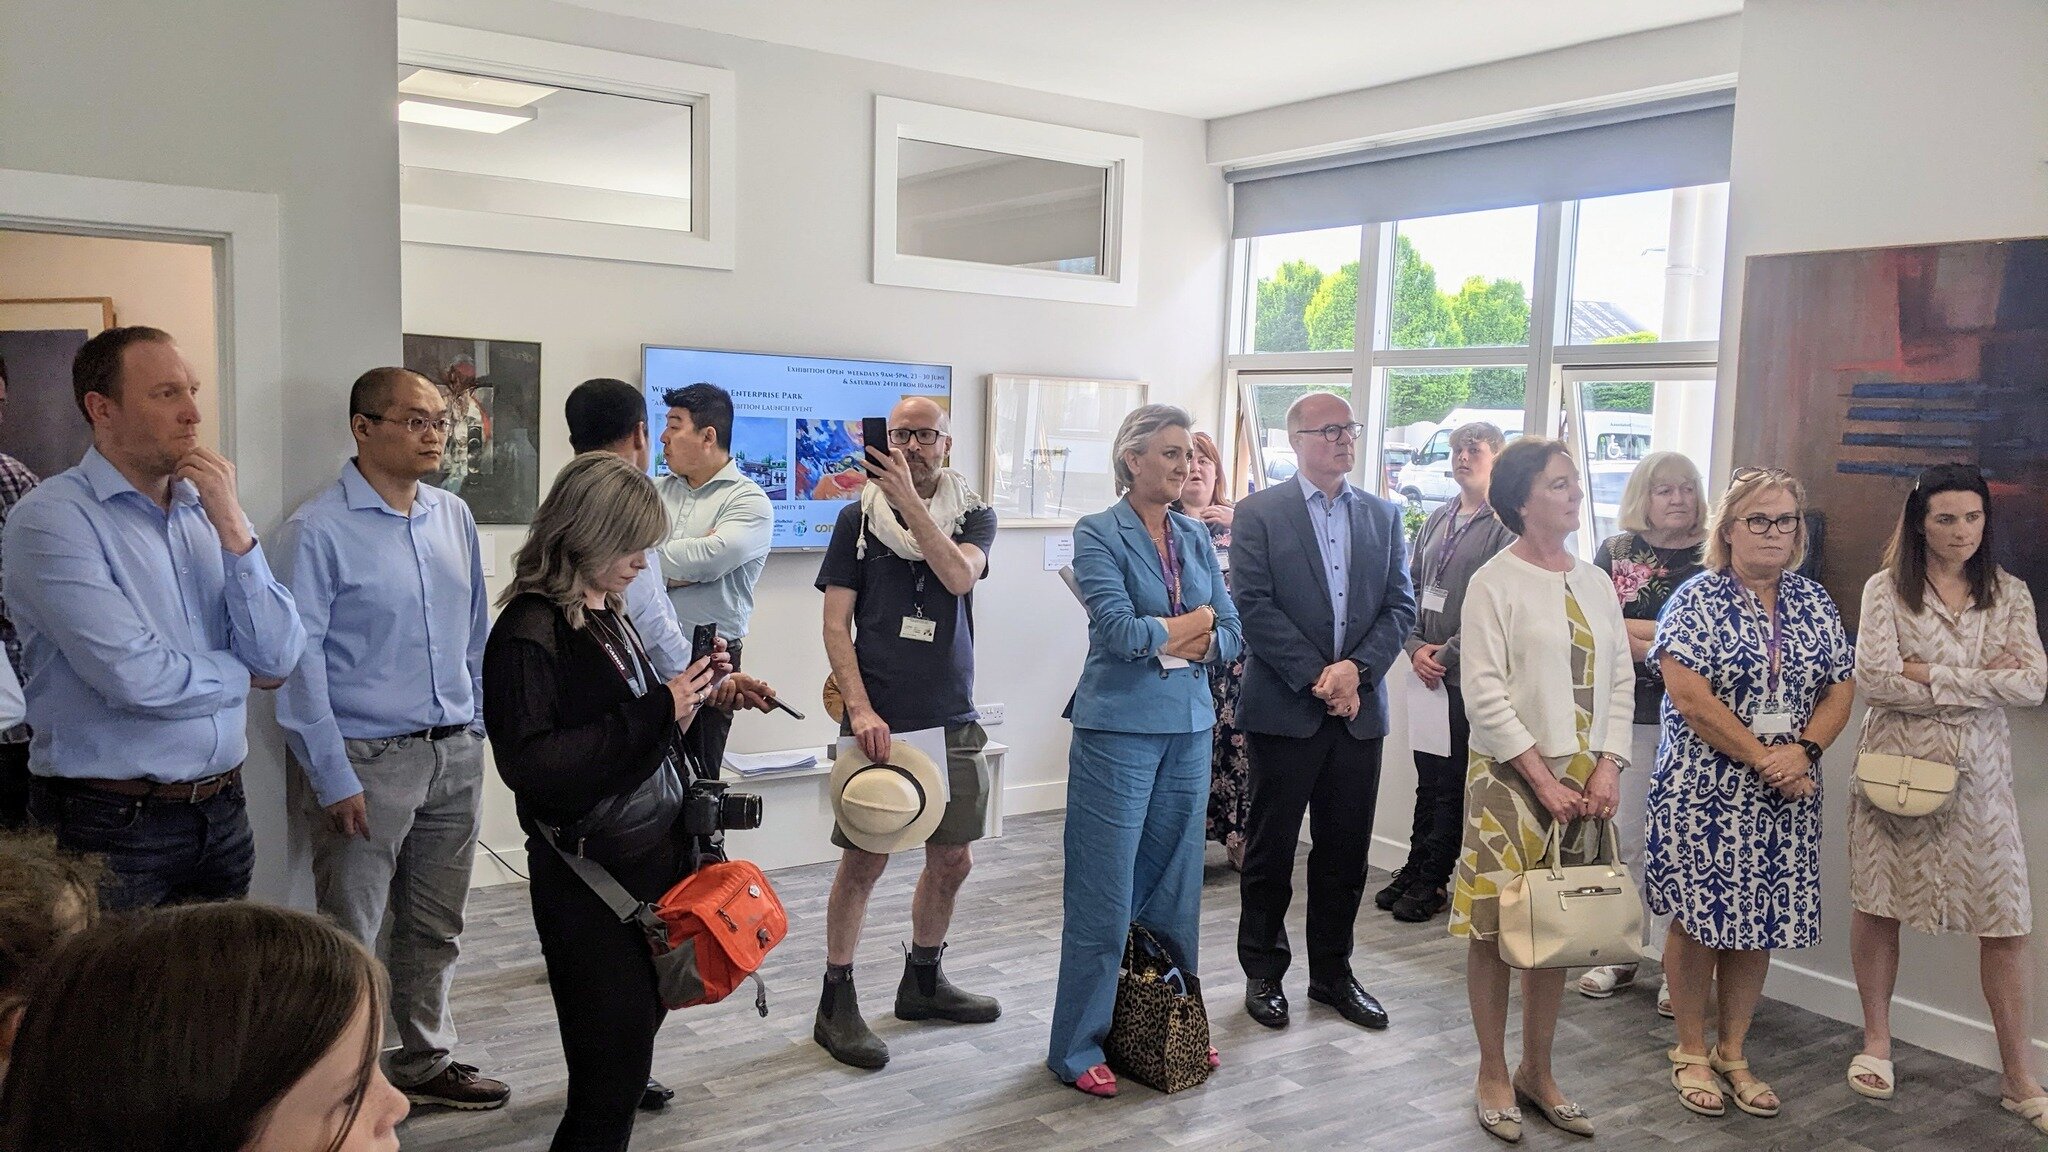 Delighted to witness the tremendous success of the 'Art in the Hubs' initiative.  Just last week, shortlisted for the Business2Arts Awards, #Artinthehubs was launched back in March and can now lay claim to its first hubs exhibition! The collaboration